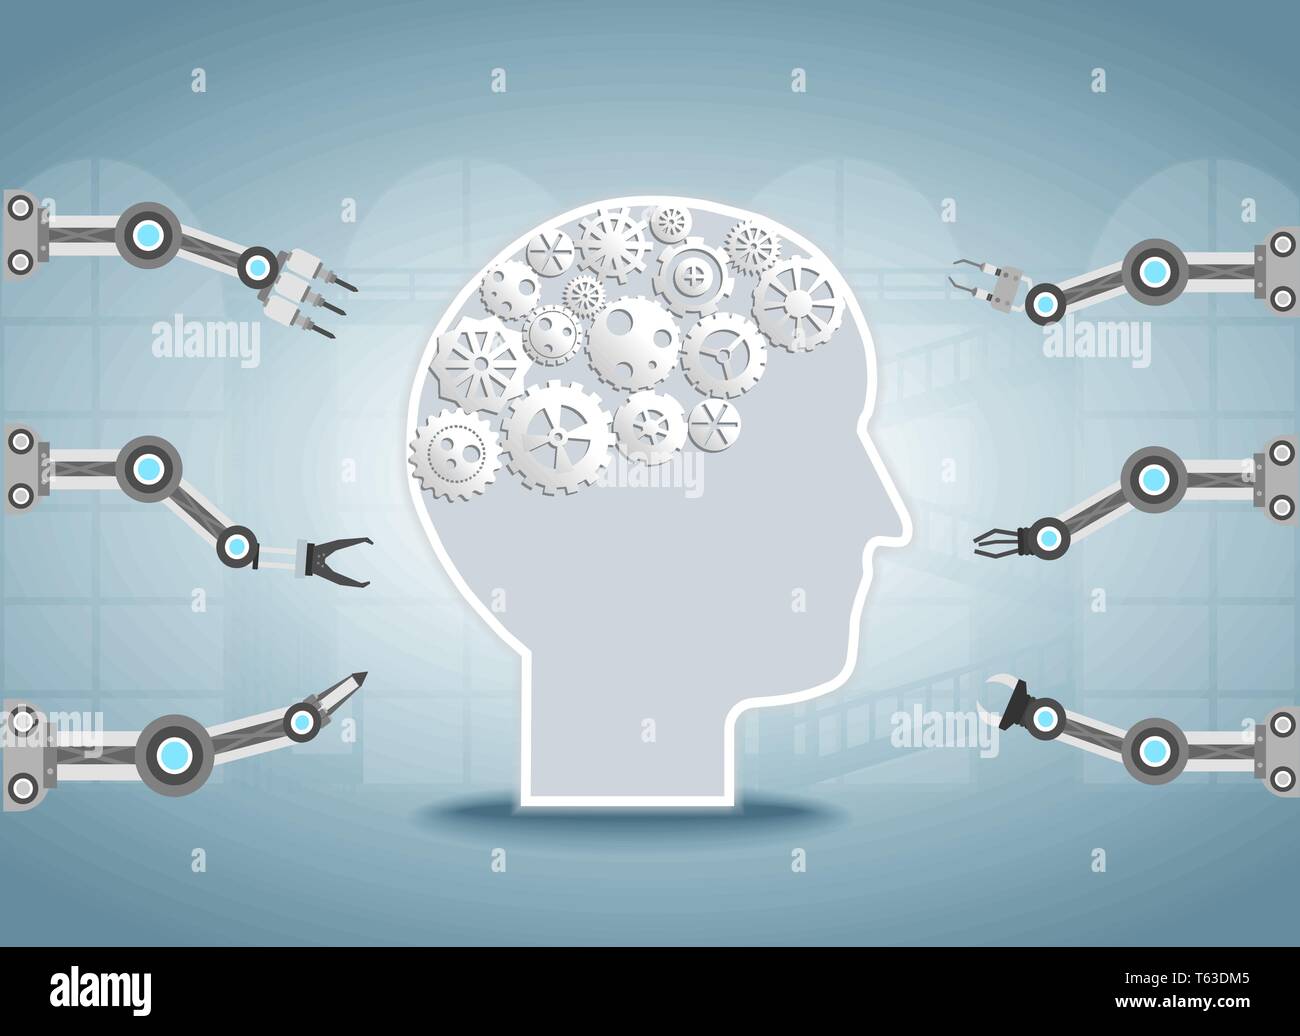 Smart factory concept with robotic arms and ai brain vector illustration Stock Vector